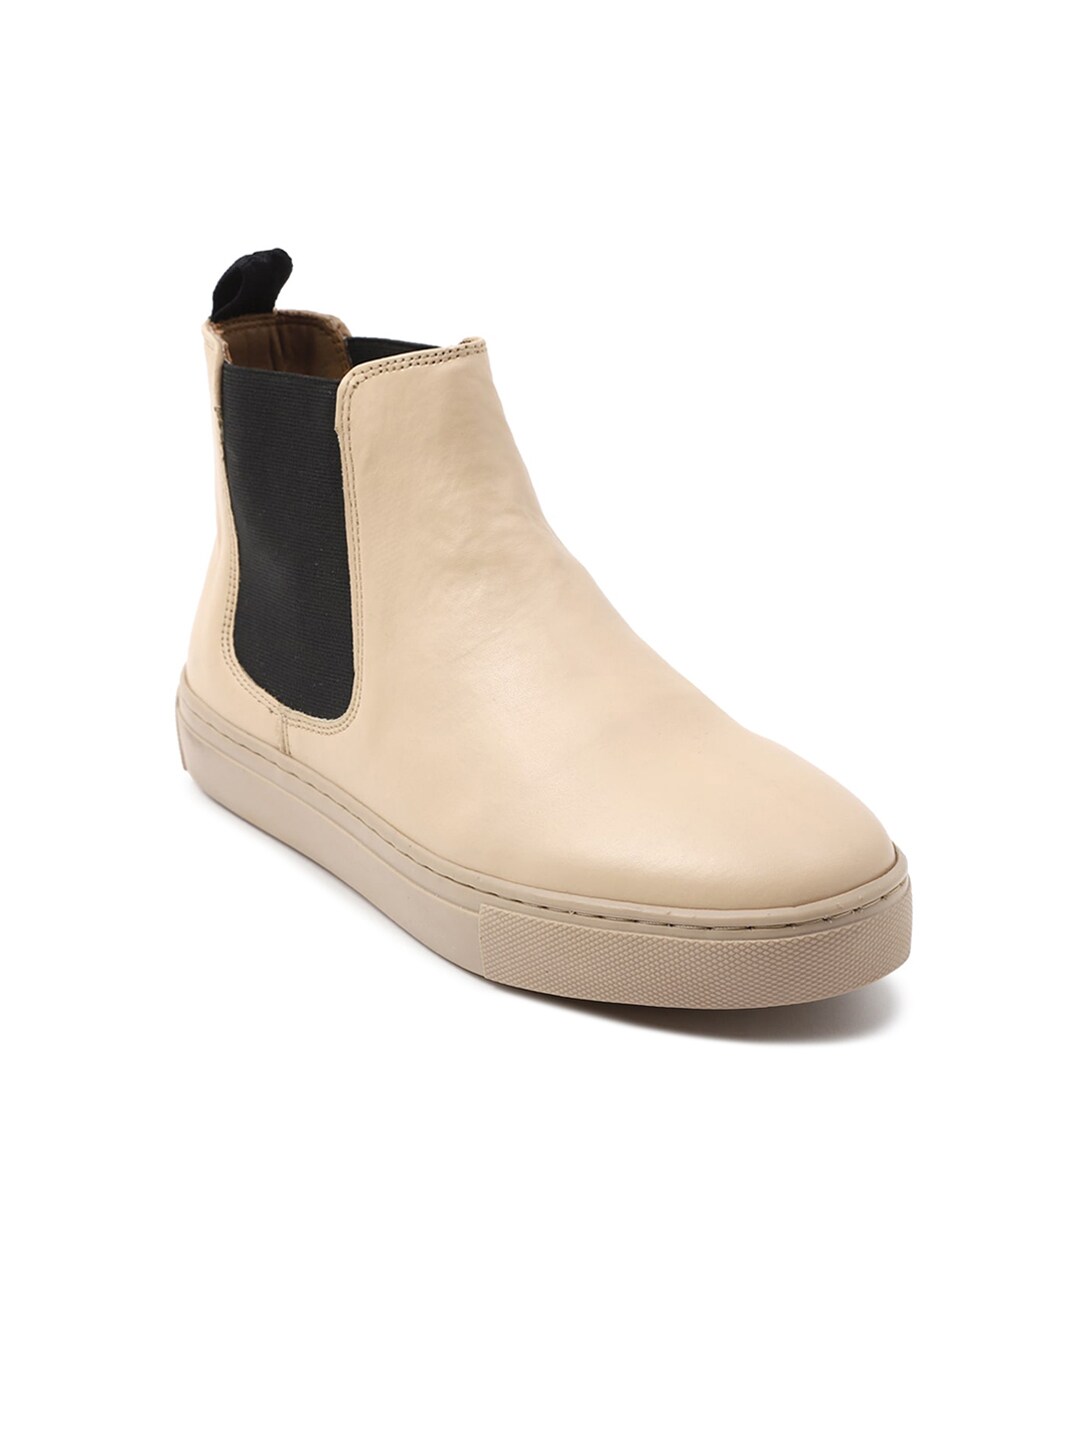 FOREVER 21 Women Beige Textured PU Flat Boots Price in India